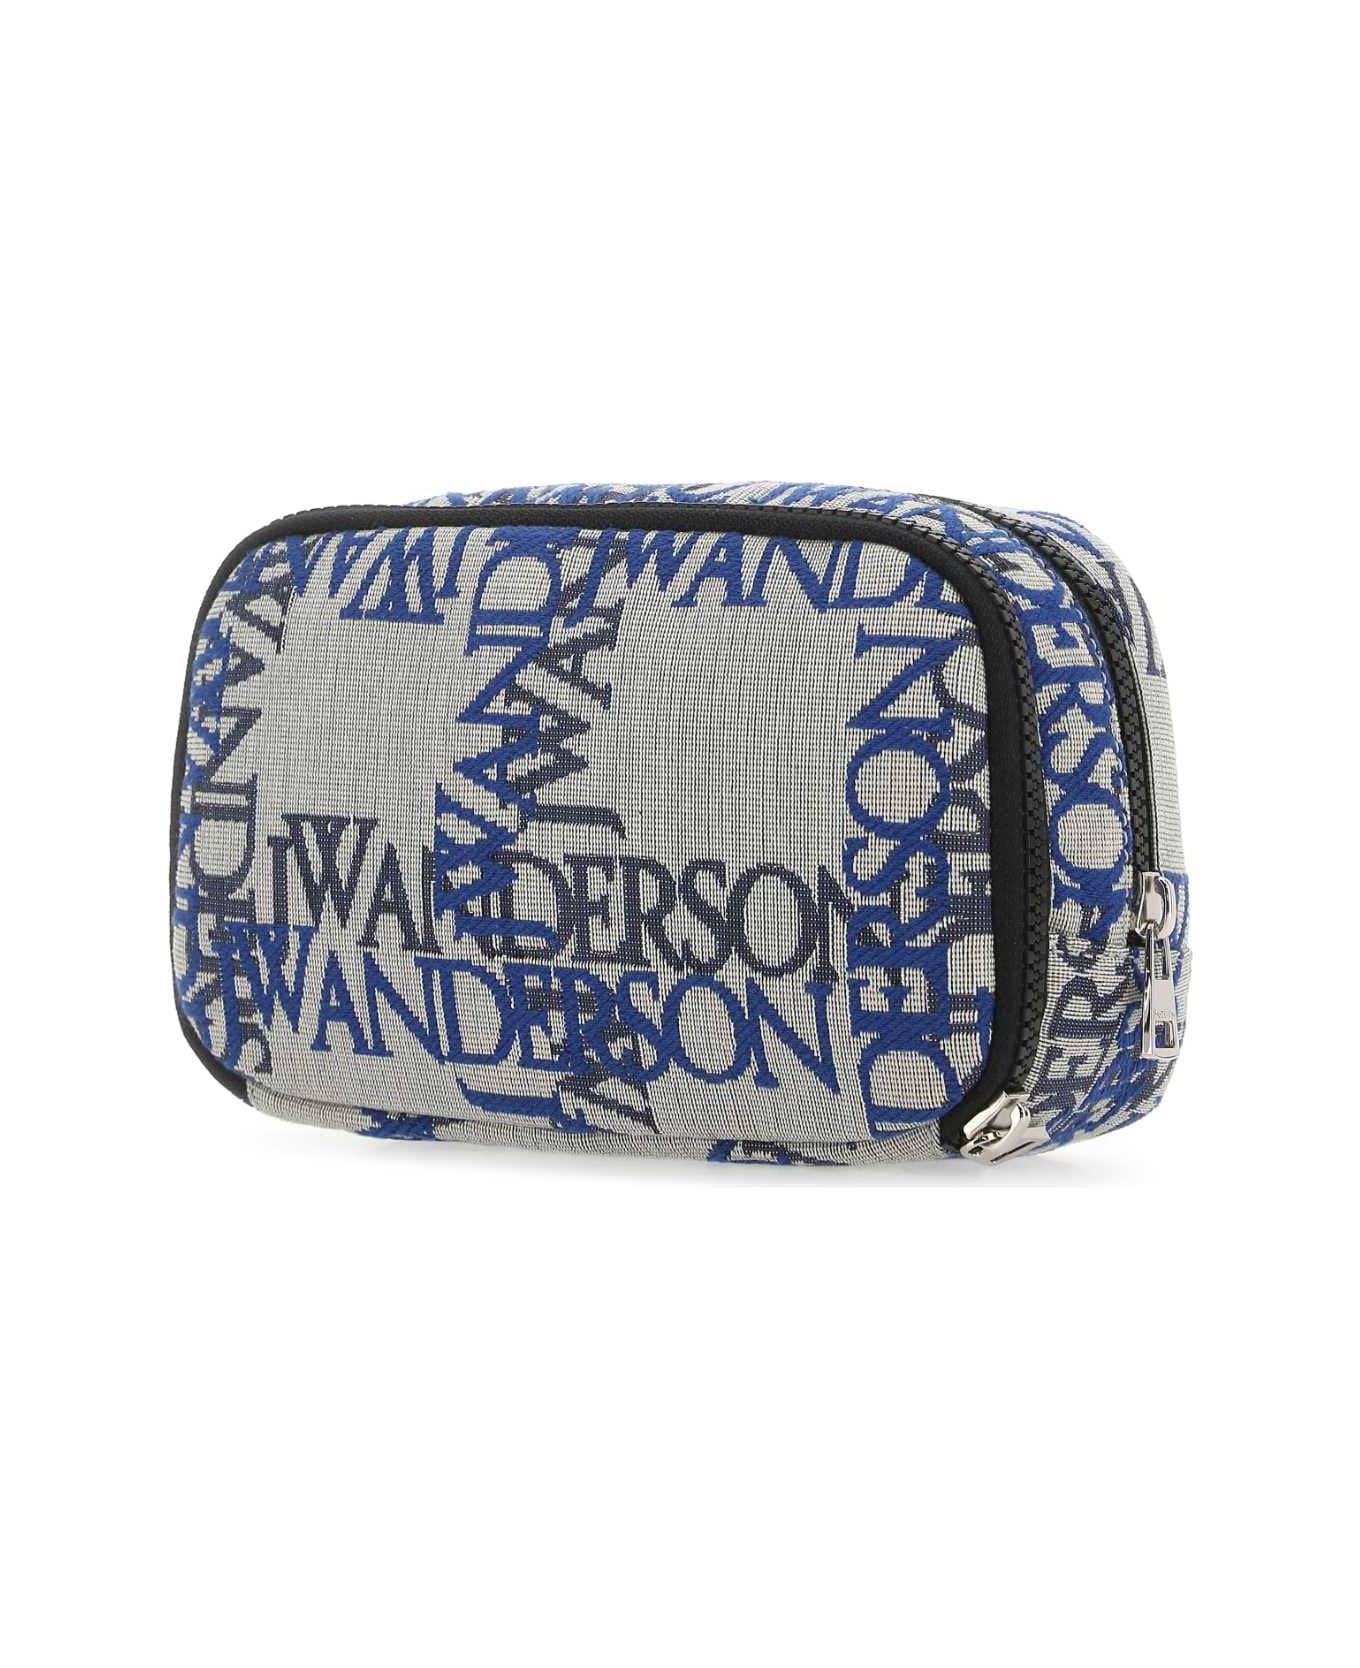 J.W. Anderson Embroidered Fabric Beauty Case - 614 クラッチバッグ